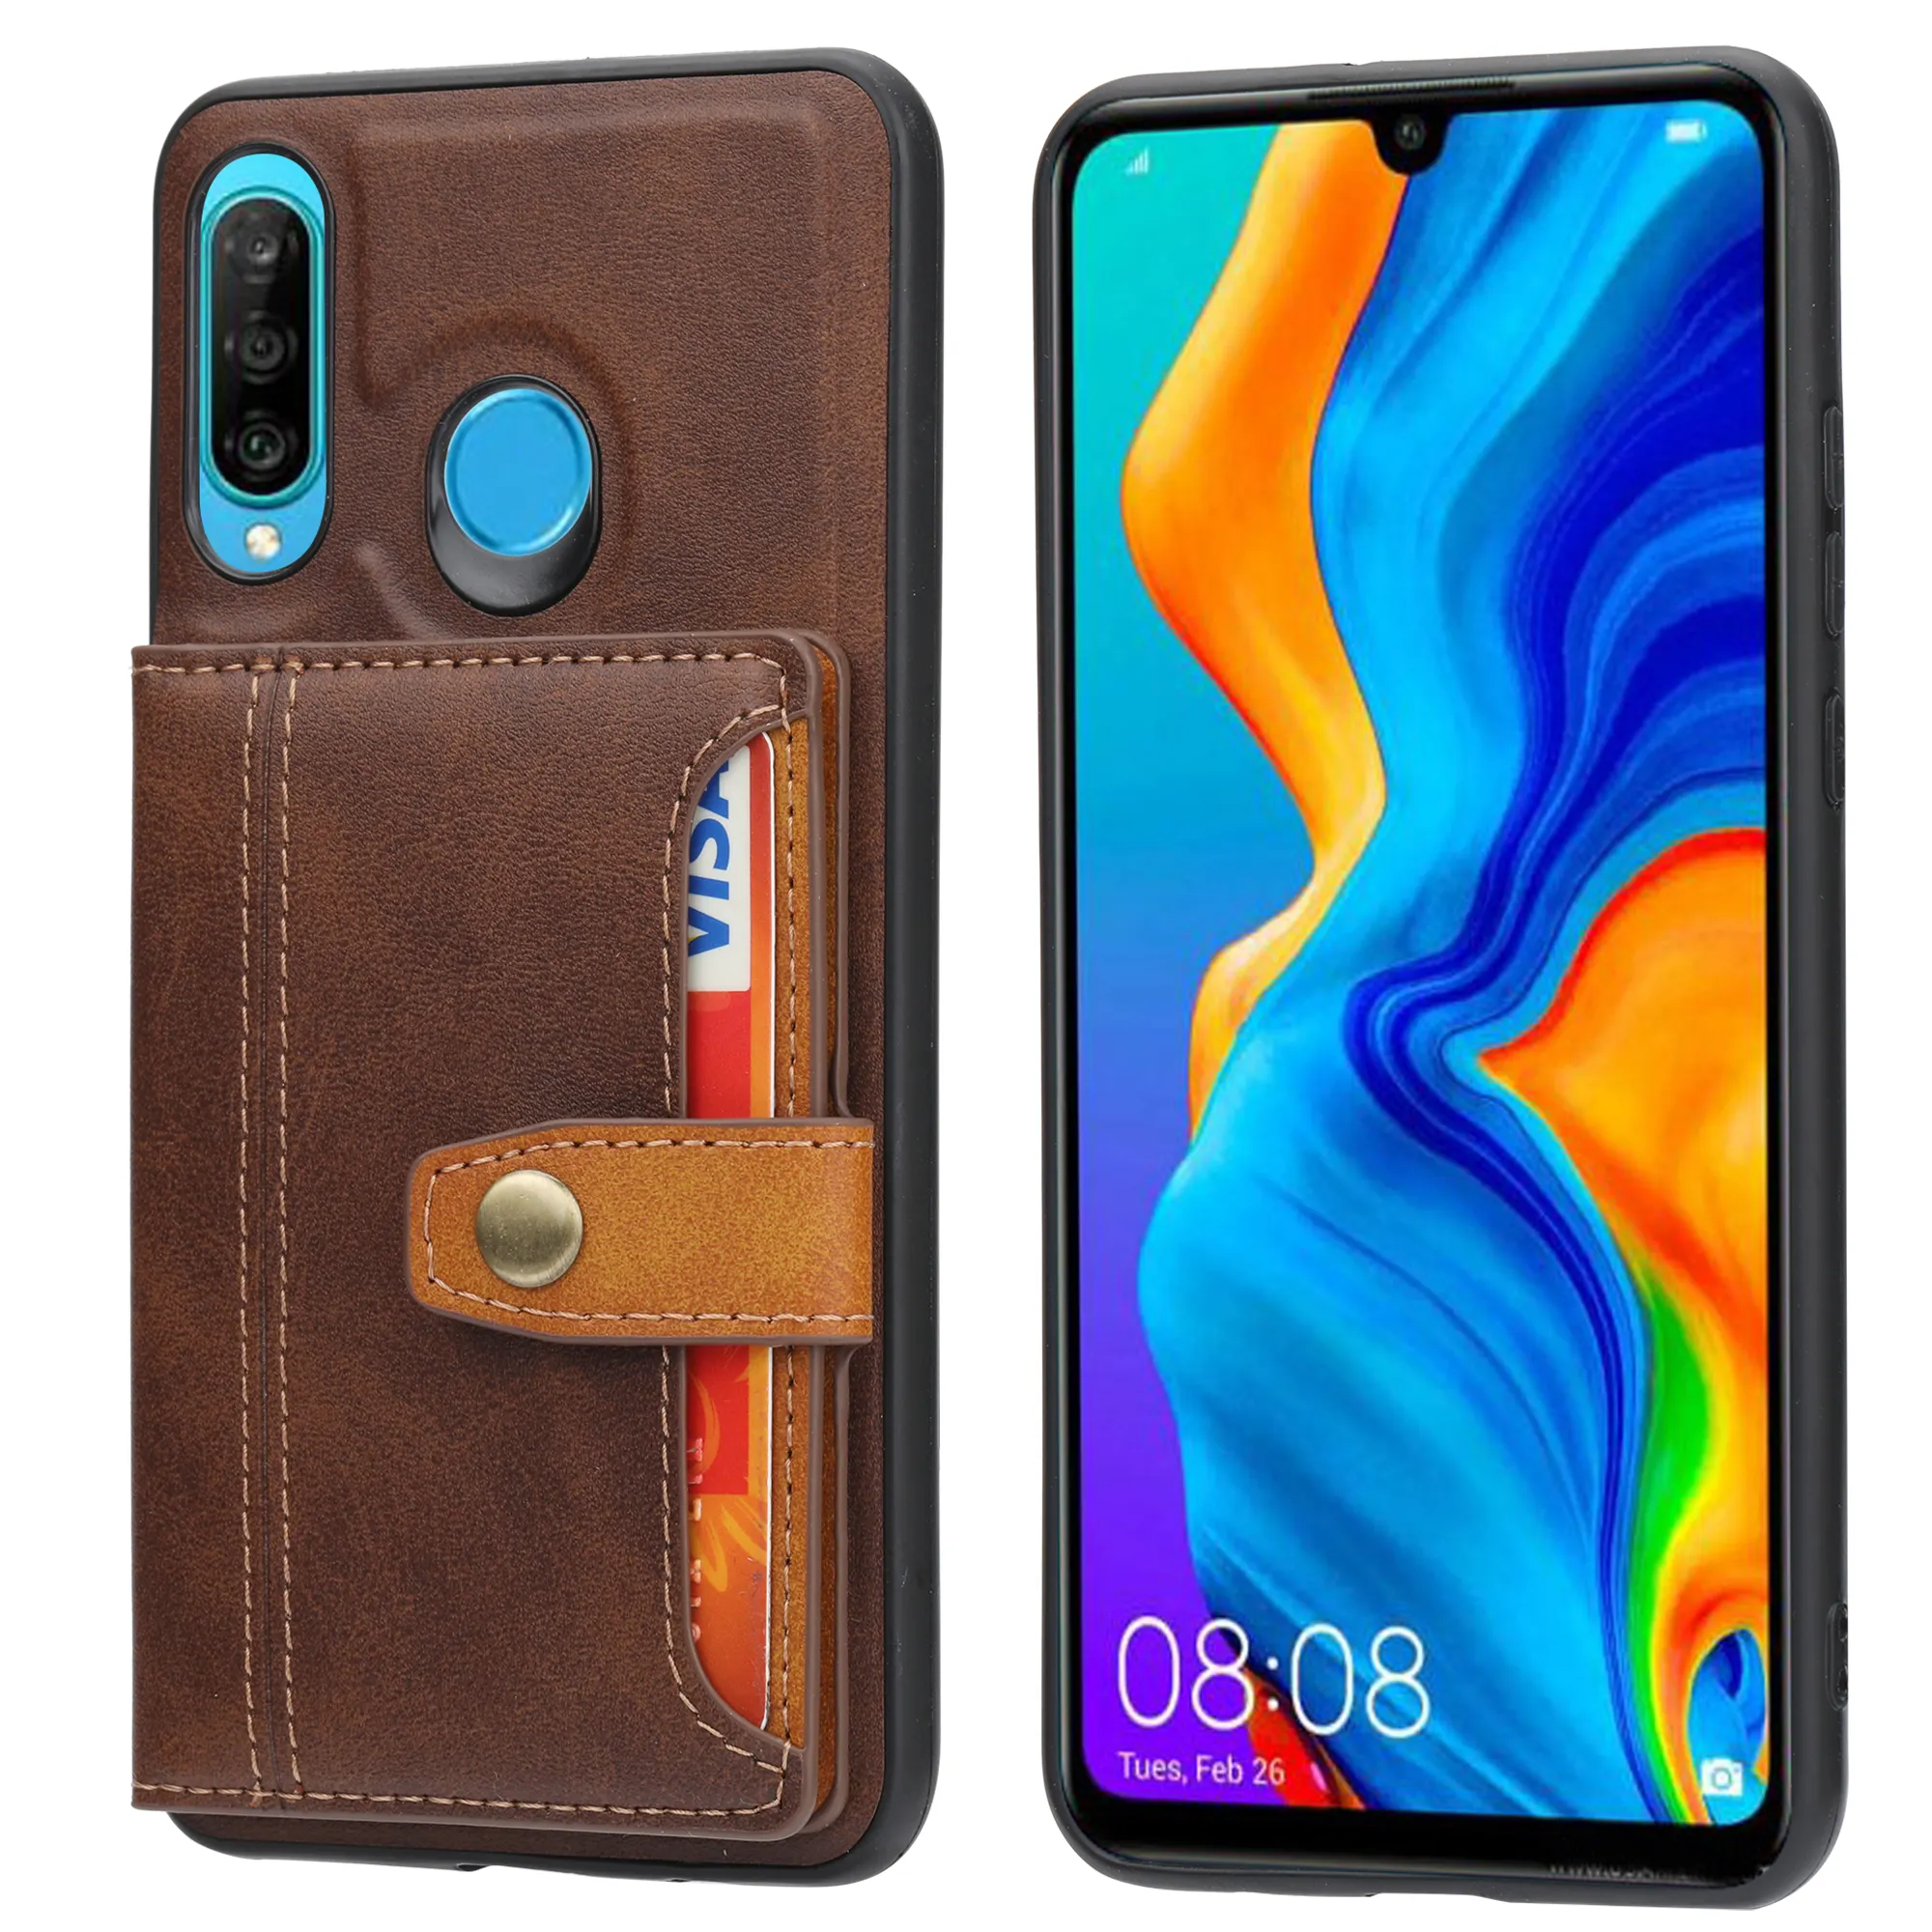 Premium Leather Multiple Card Holders Hard Shockproof Case For Huawei P30 Back Cover